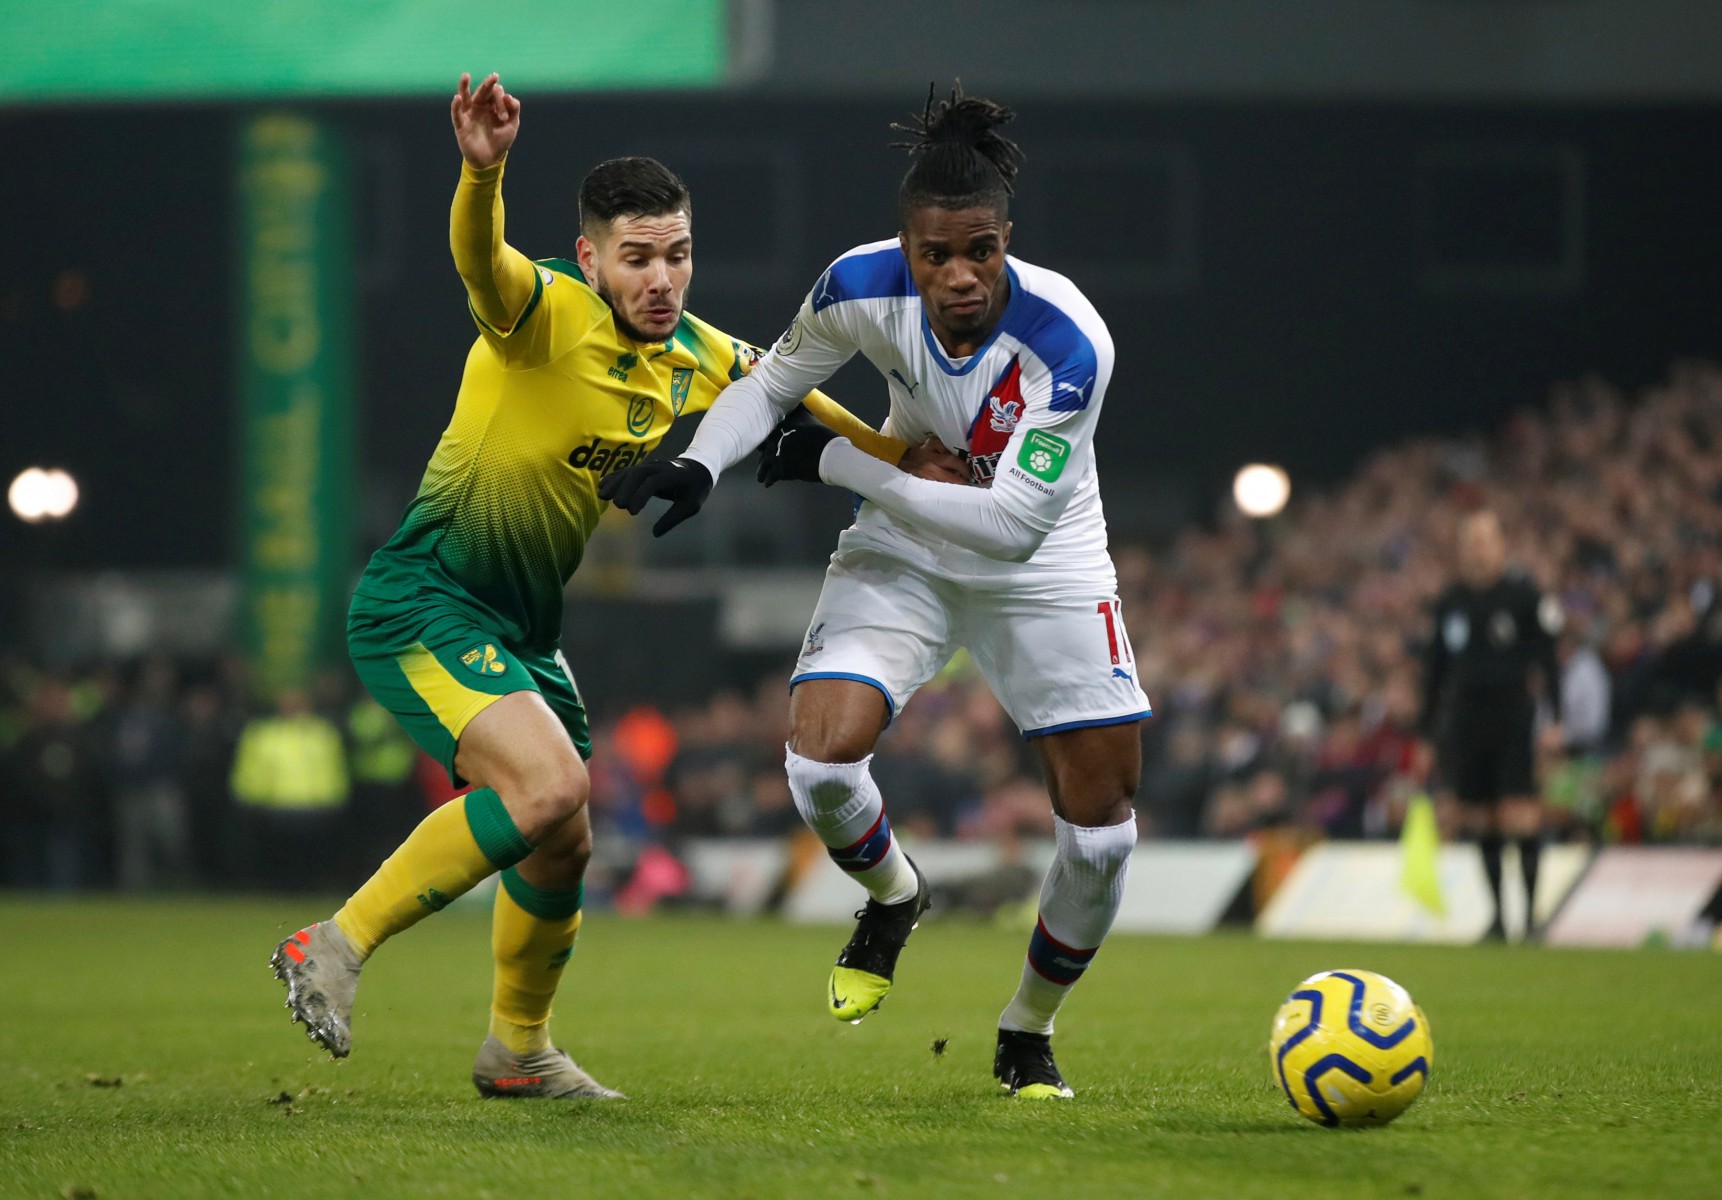 Crystal Palace winger Wilfried Zaha could be a target this month - although the Eagles want 80m for their star man